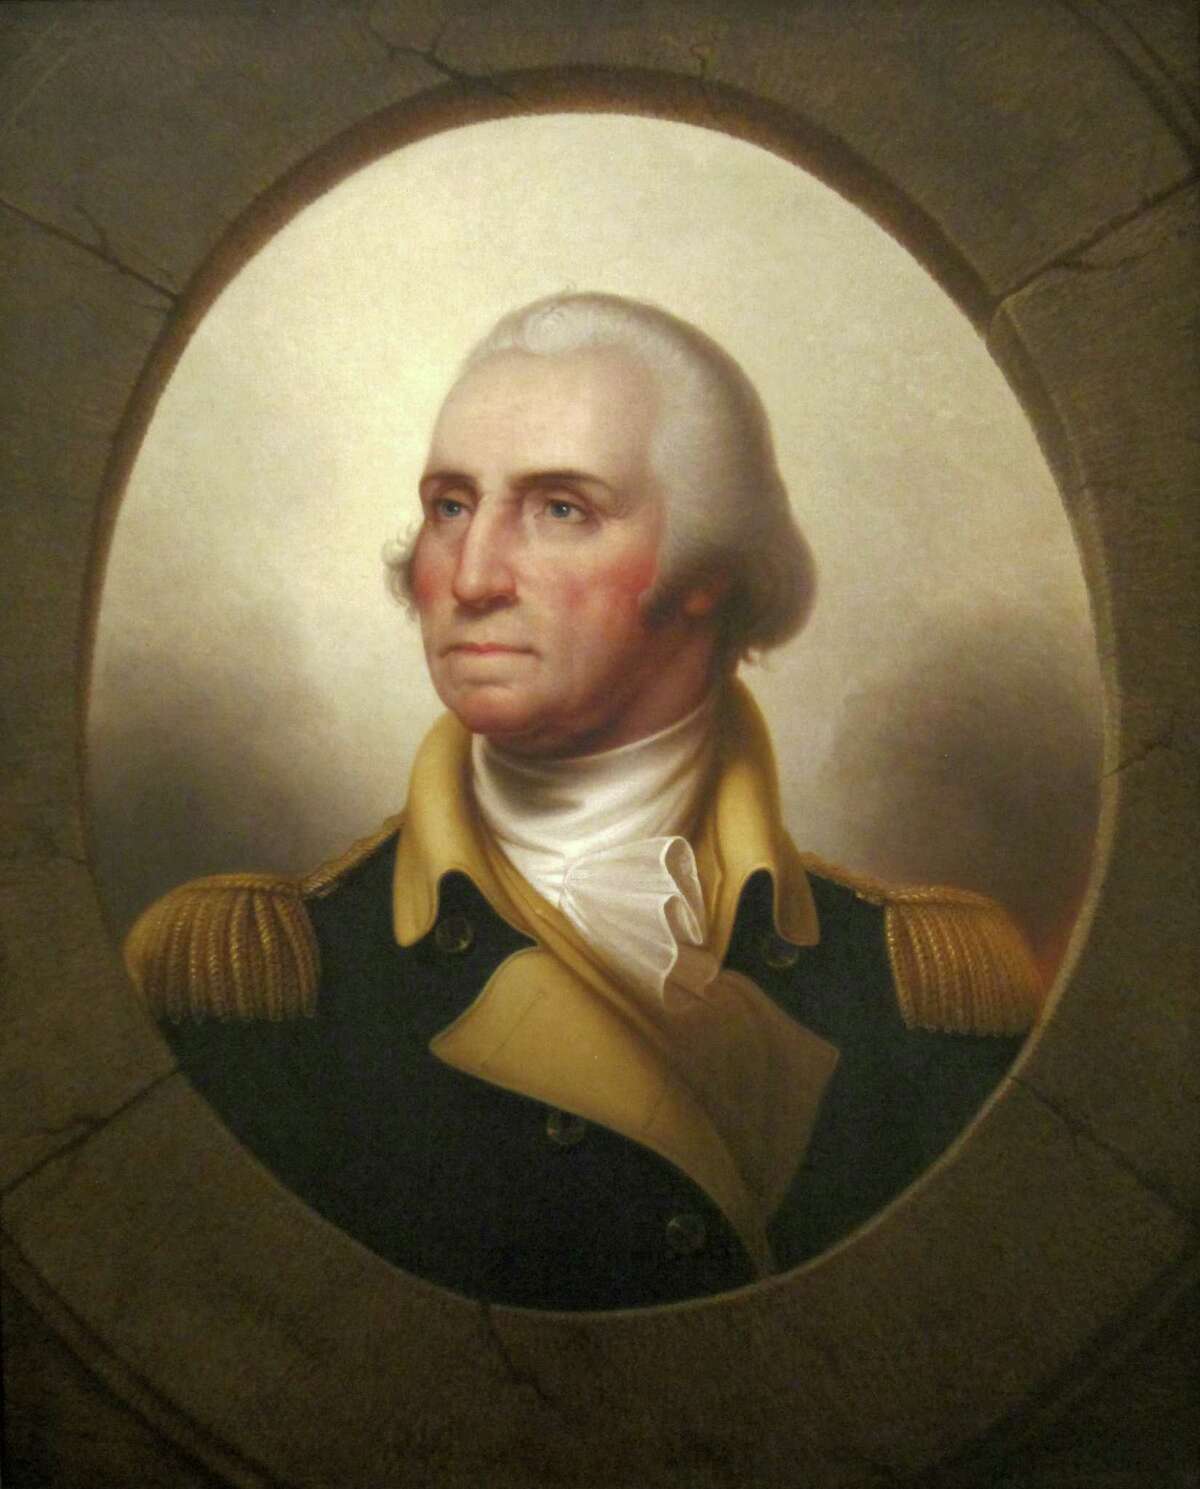 Rich kid George Washington was born in Virginia into relative wealth, but hit the big time when, at age 37, he married rich widow, Martha Custis.